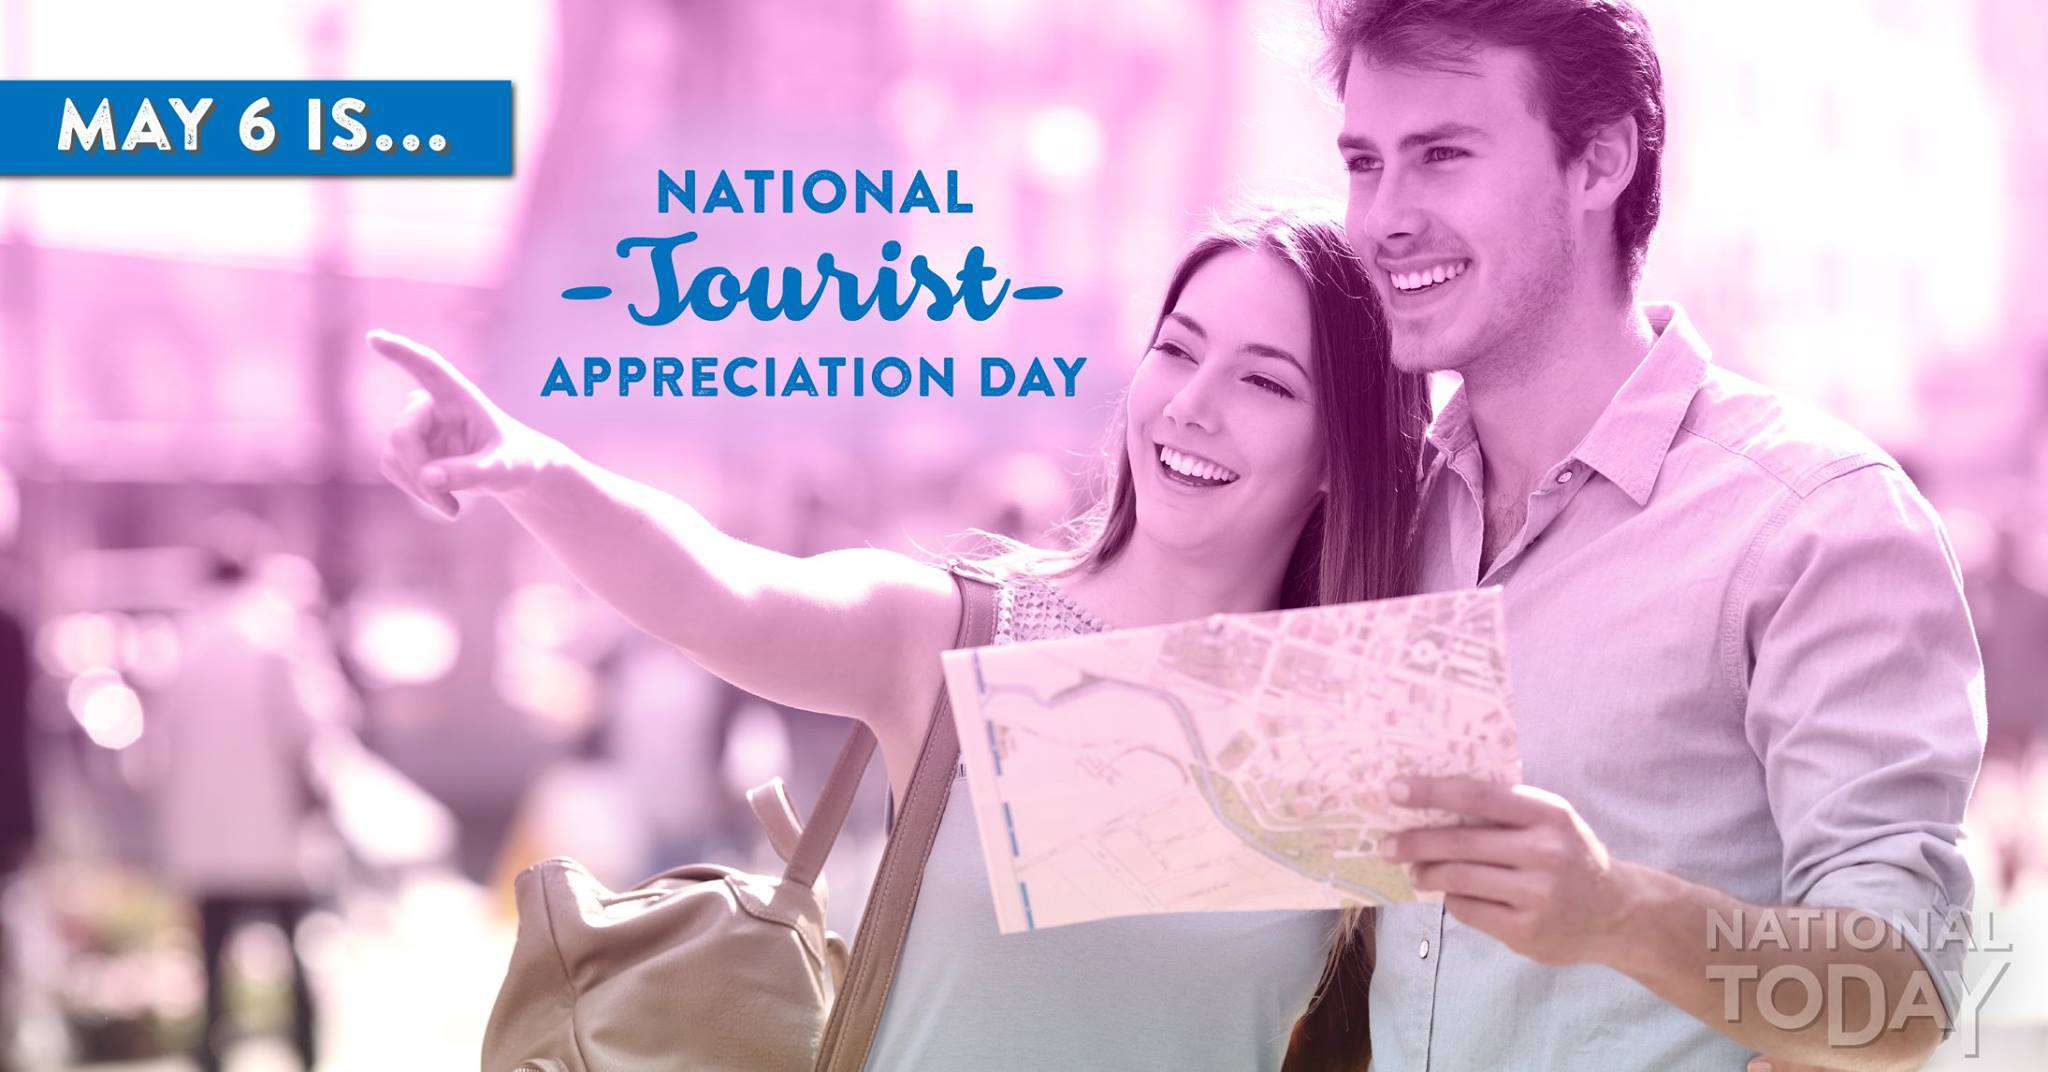 National Tourist Appreciation Day Wishes